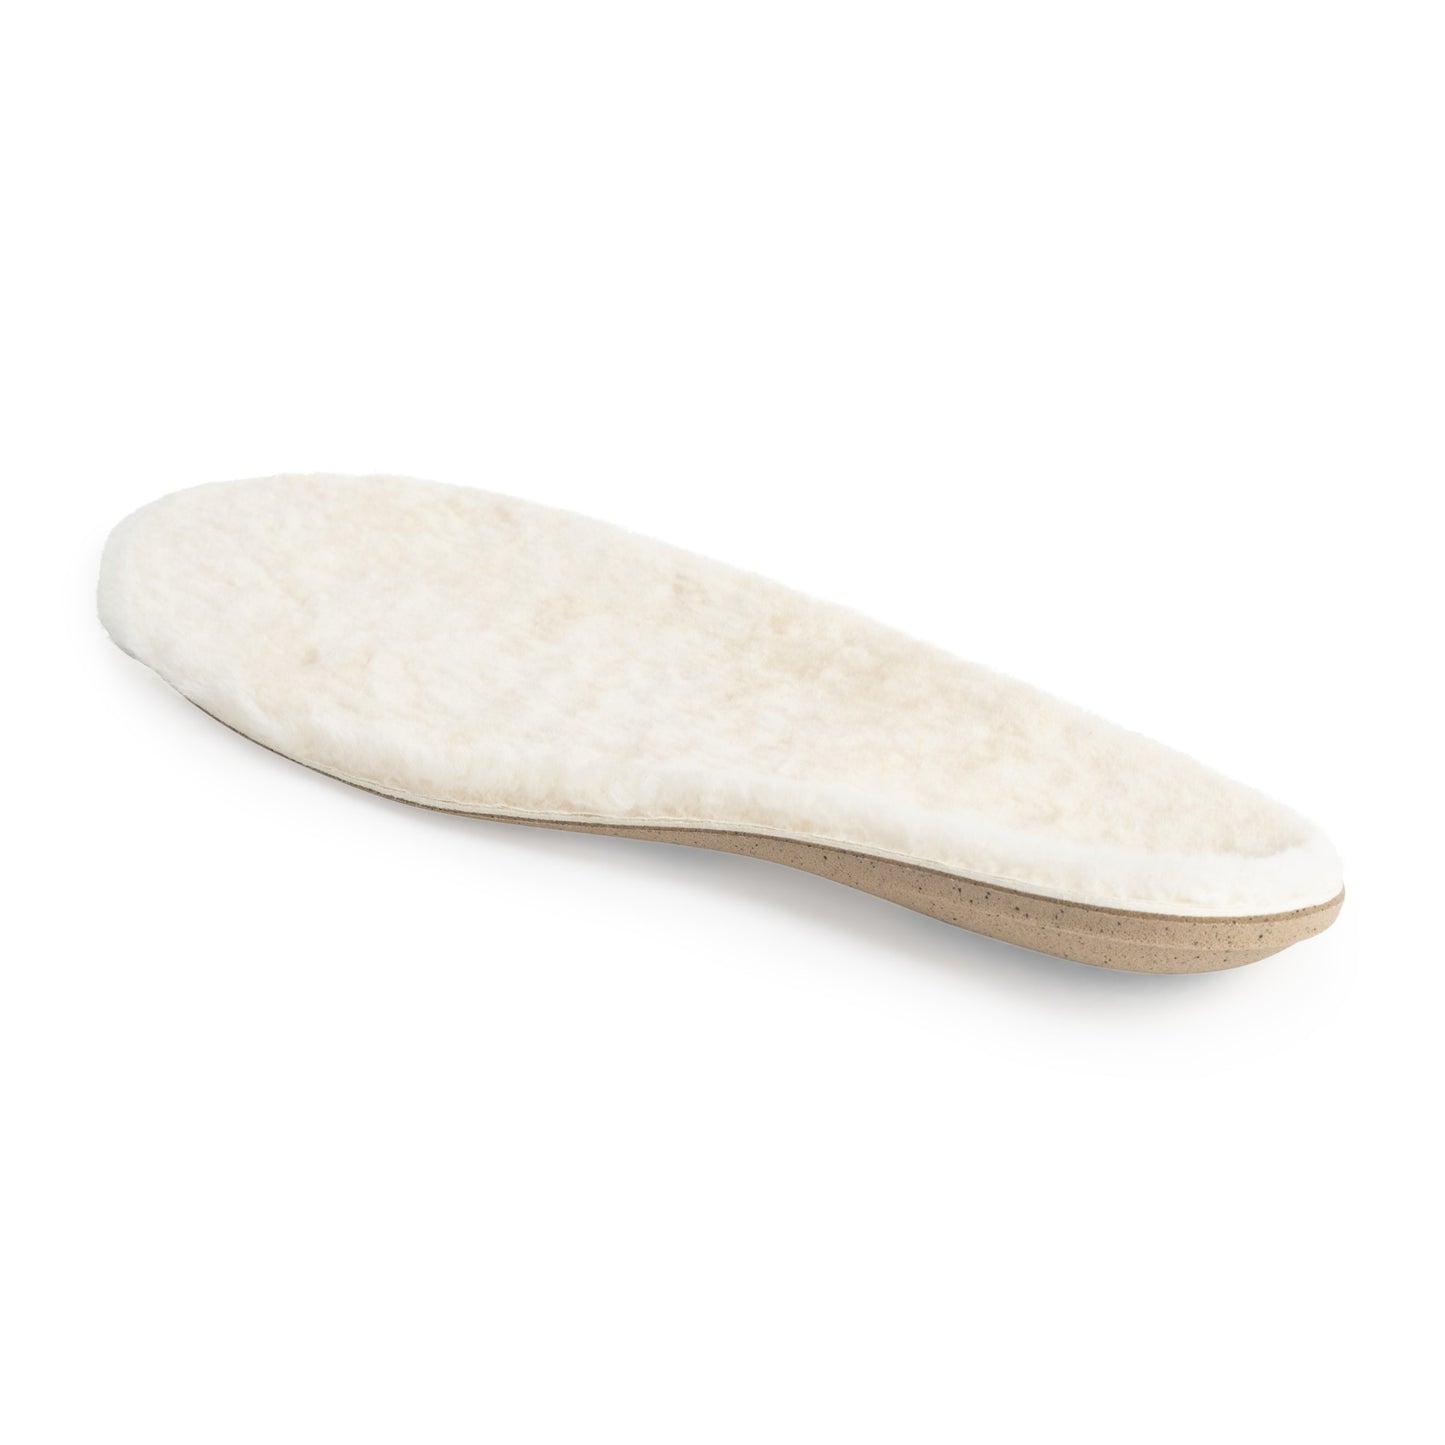 Wool shearling top covers for Tread Labs orthotics